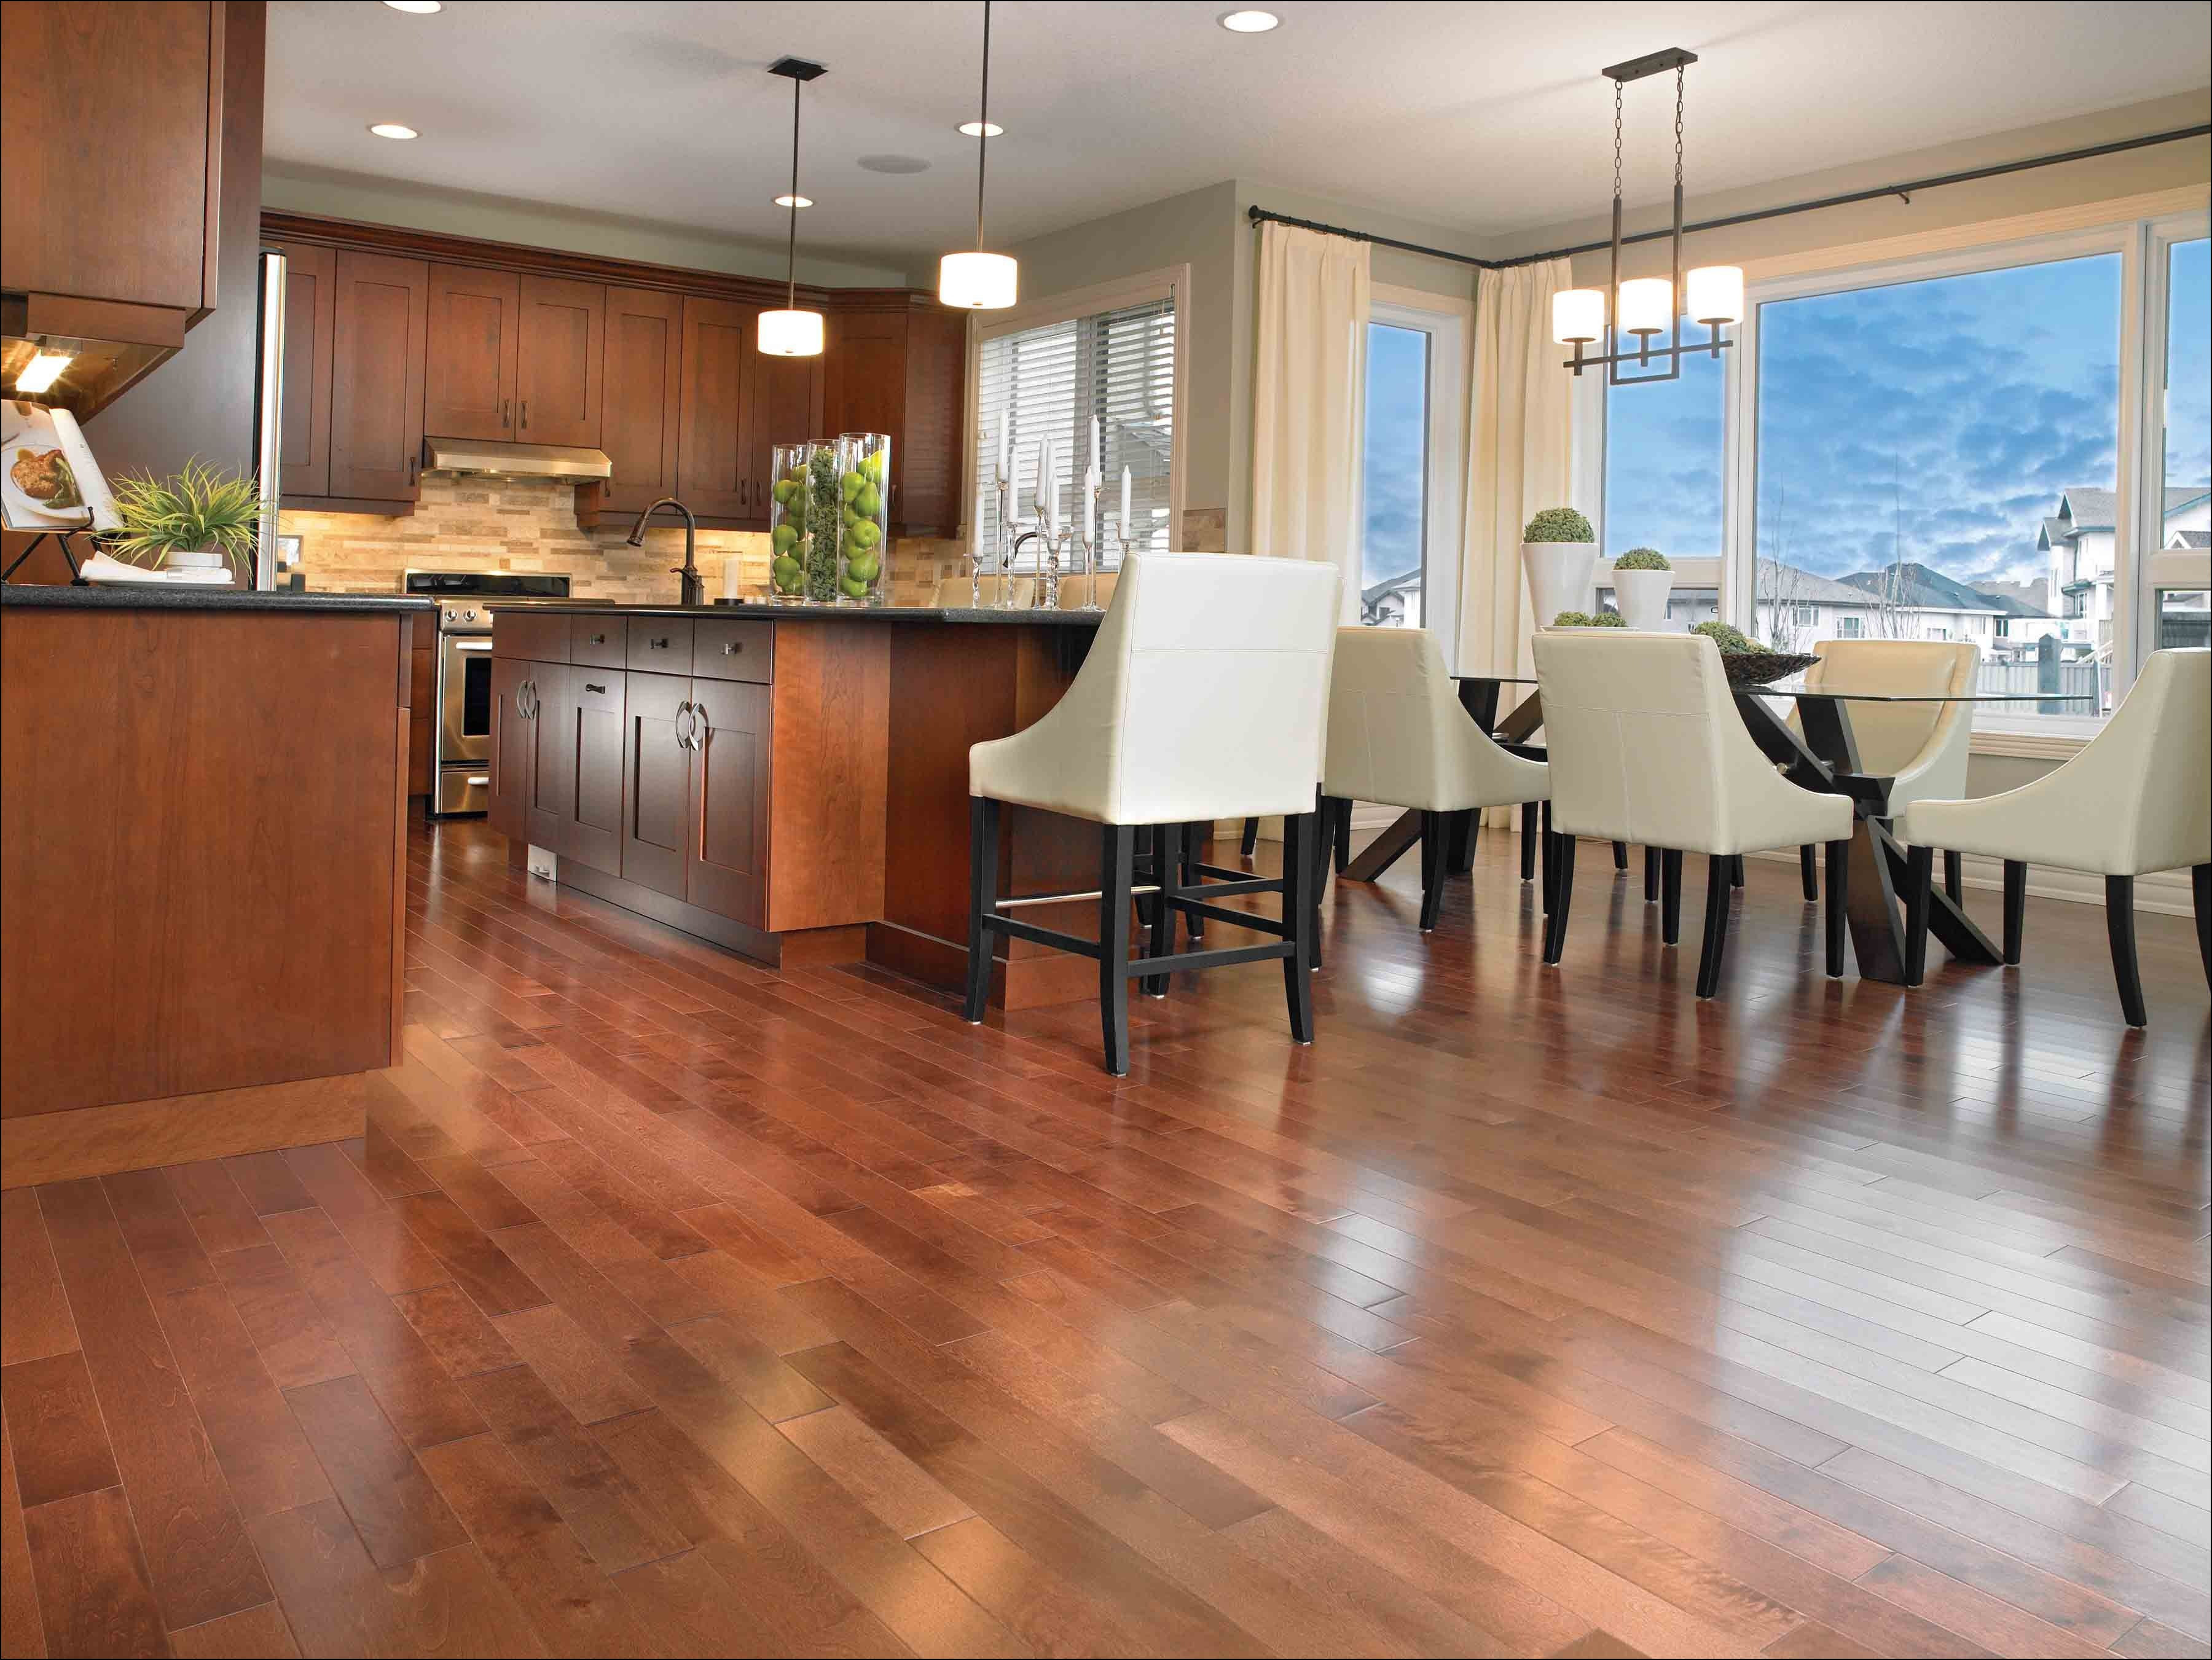 28 attractive Hardwood Floors and Water 2024 free download hardwood floors and water of hardwood flooring suppliers france flooring ideas within hardwood flooring installation san diego images 54 best exotic flooring images on pinterest of hardwood 